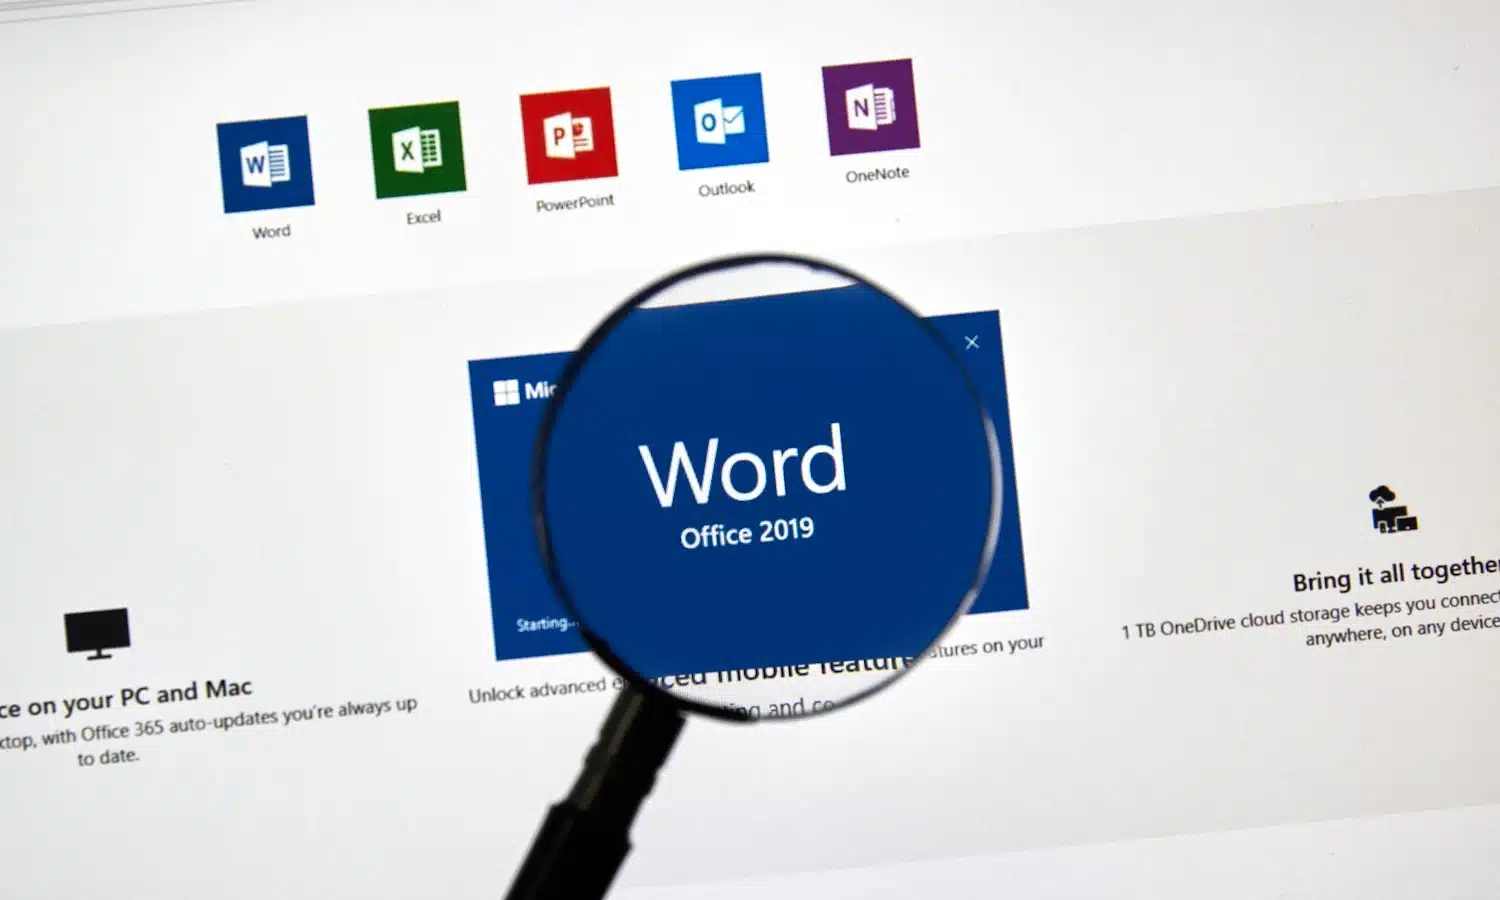 Microsoft reminds about the end of support for Office 2016 and Office 2019.